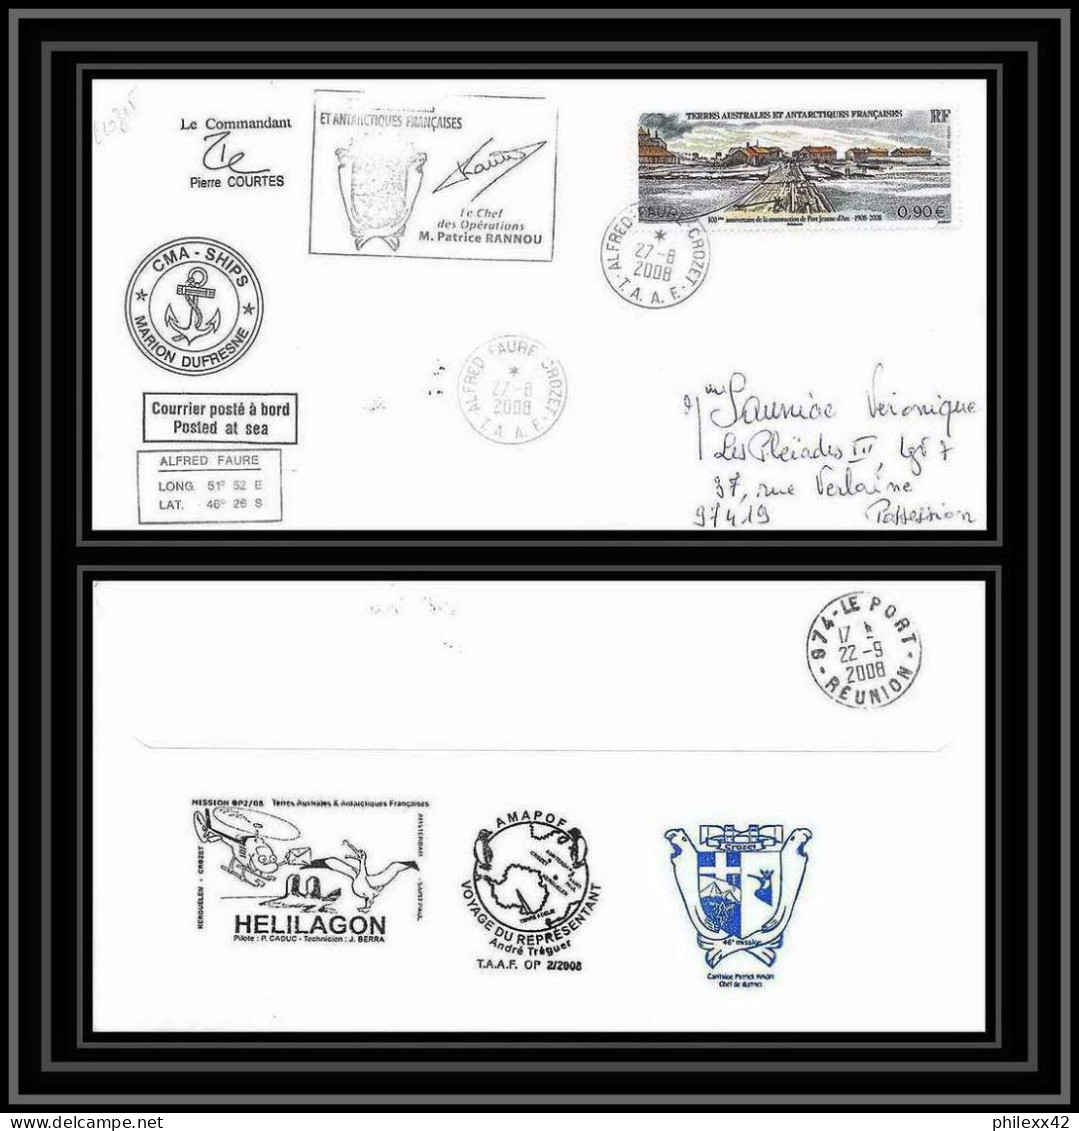 2825 ANTARCTIC Terres Australes TAAF Helilagon Lettre Cover Dufresne Signé Signed Op 2008/2 CROZET N°504 27/8/2008 - Helicópteros